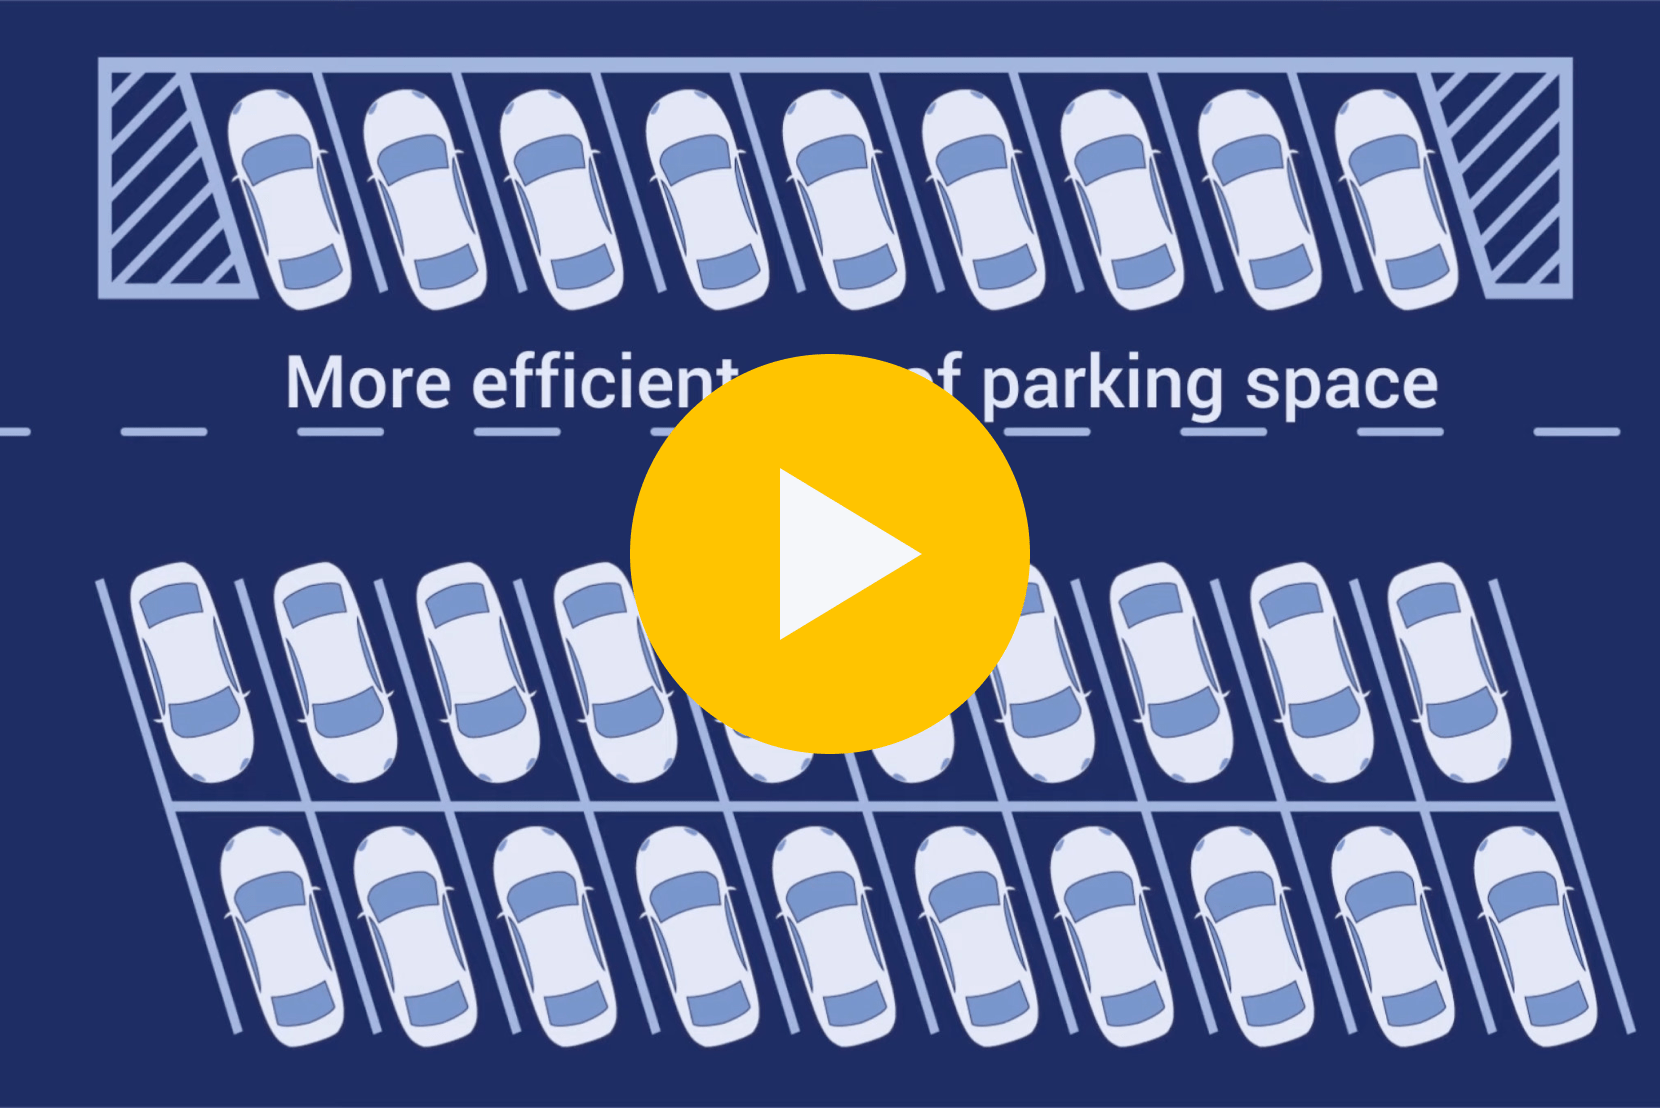 'Automated Valet Parking (AVP) by NTT DATA